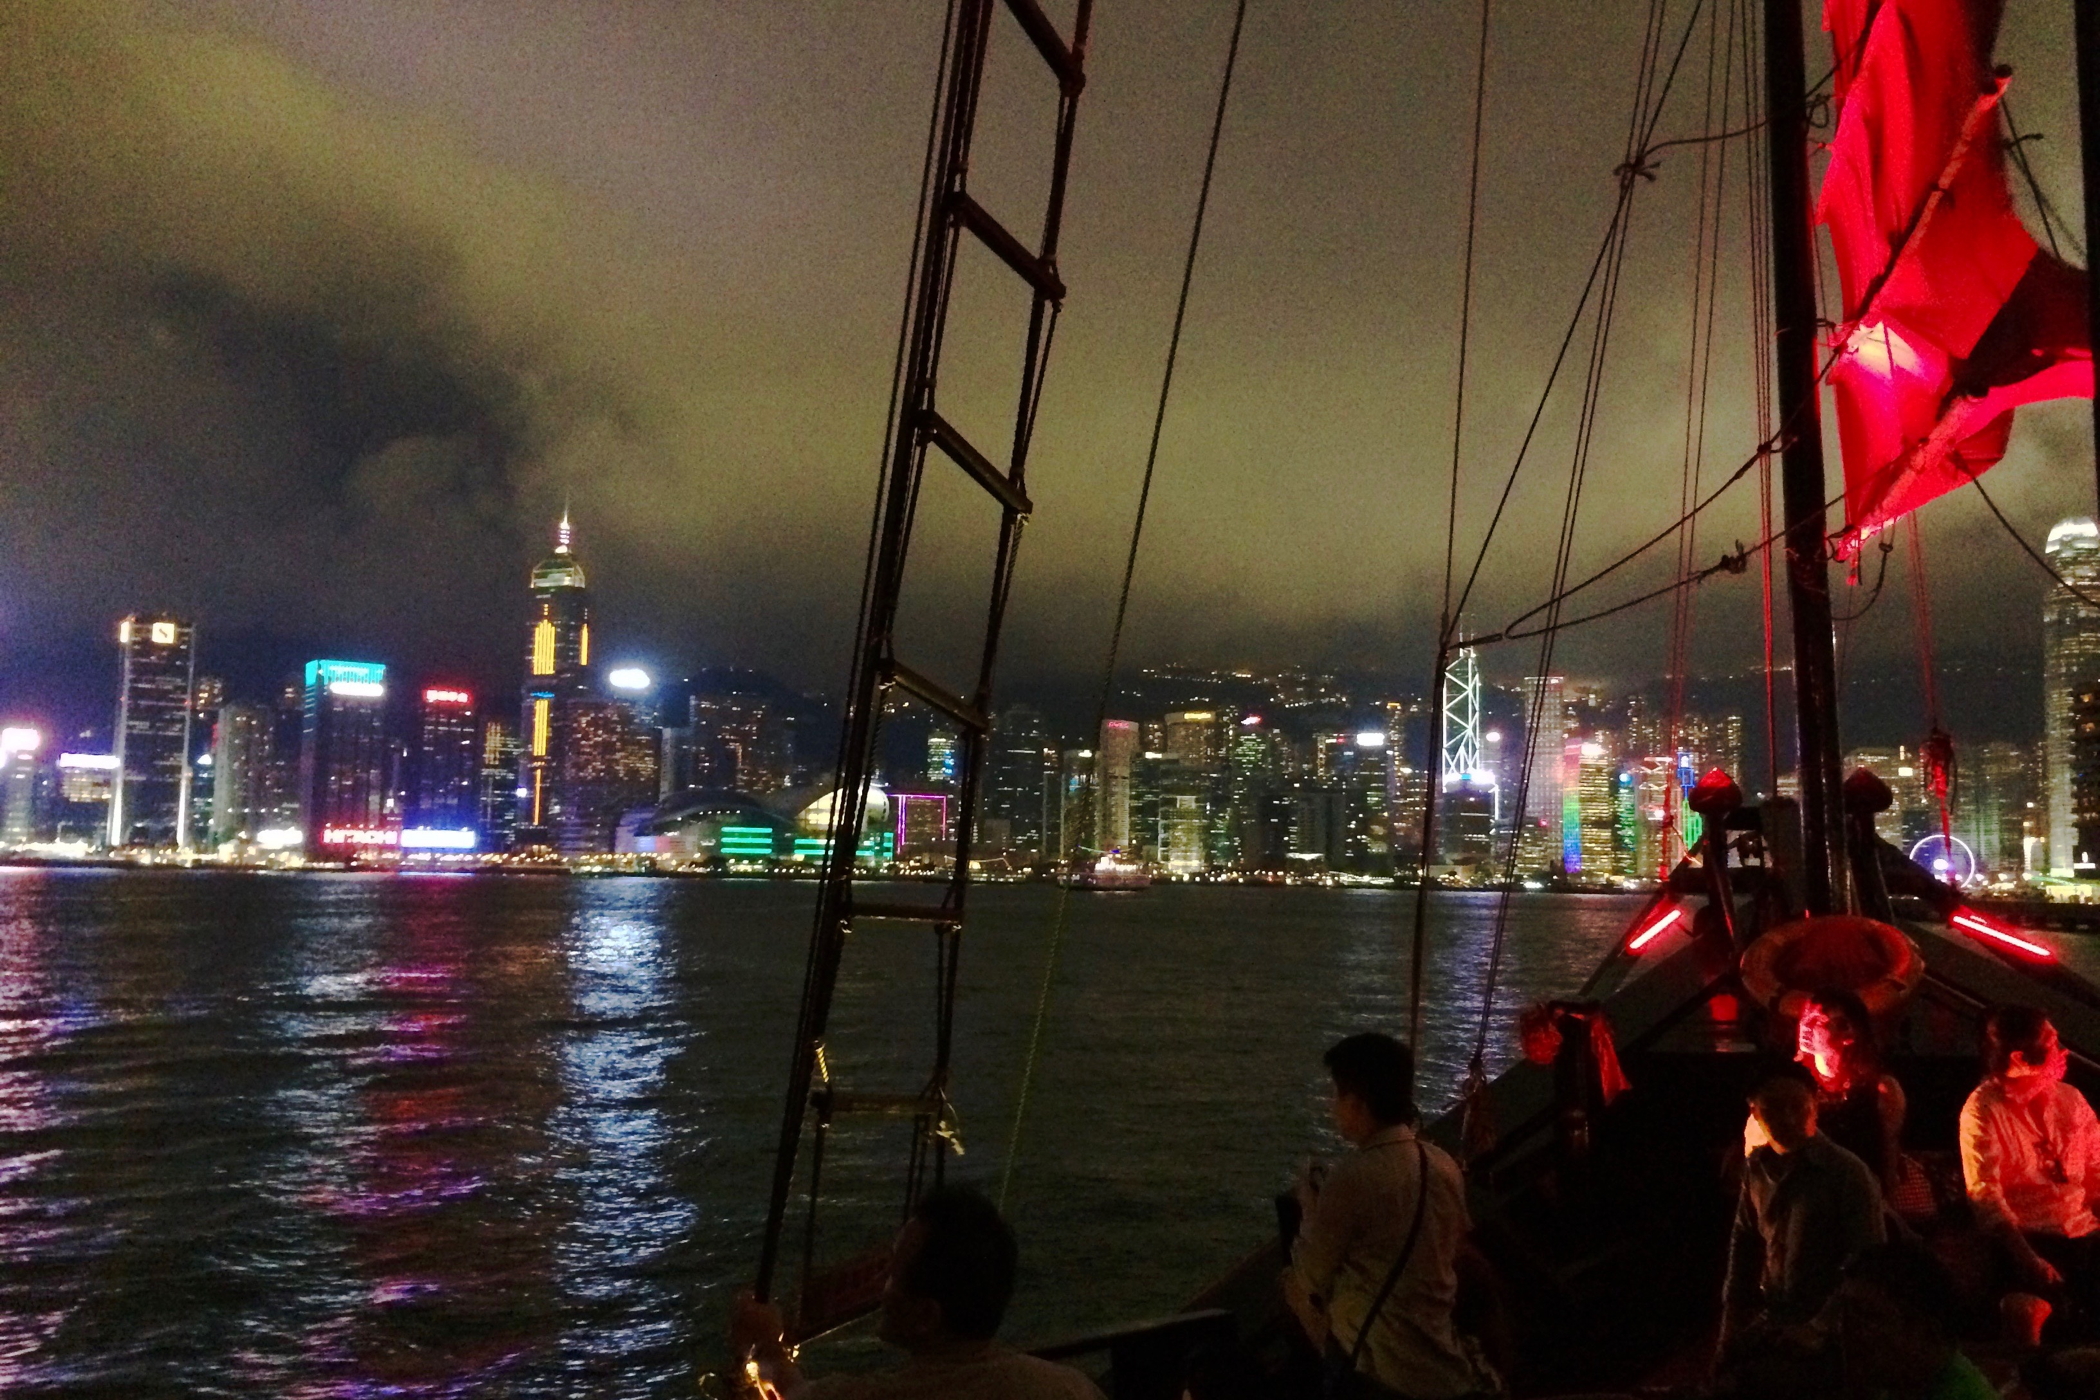 A junk ride and other Unordinary things to do in Hong Kong